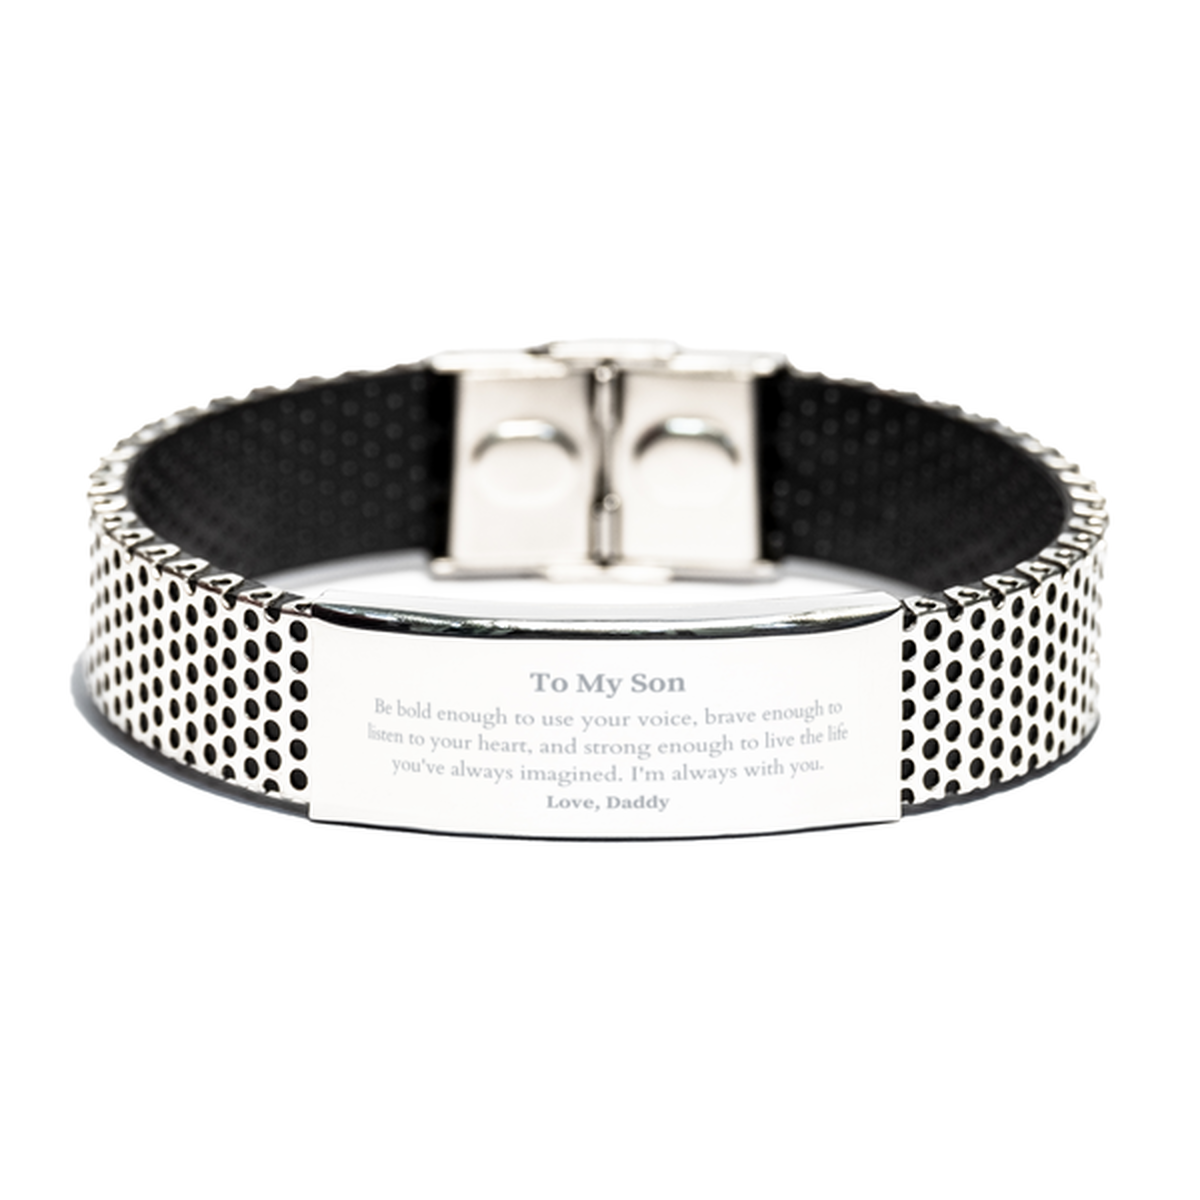 Keepsake Son Stainless Steel Bracelet Gift Idea Graduation Christmas Birthday Son from Daddy, Son Be bold enough to use your voice, brave enough to listen to your heart. Love, Daddy